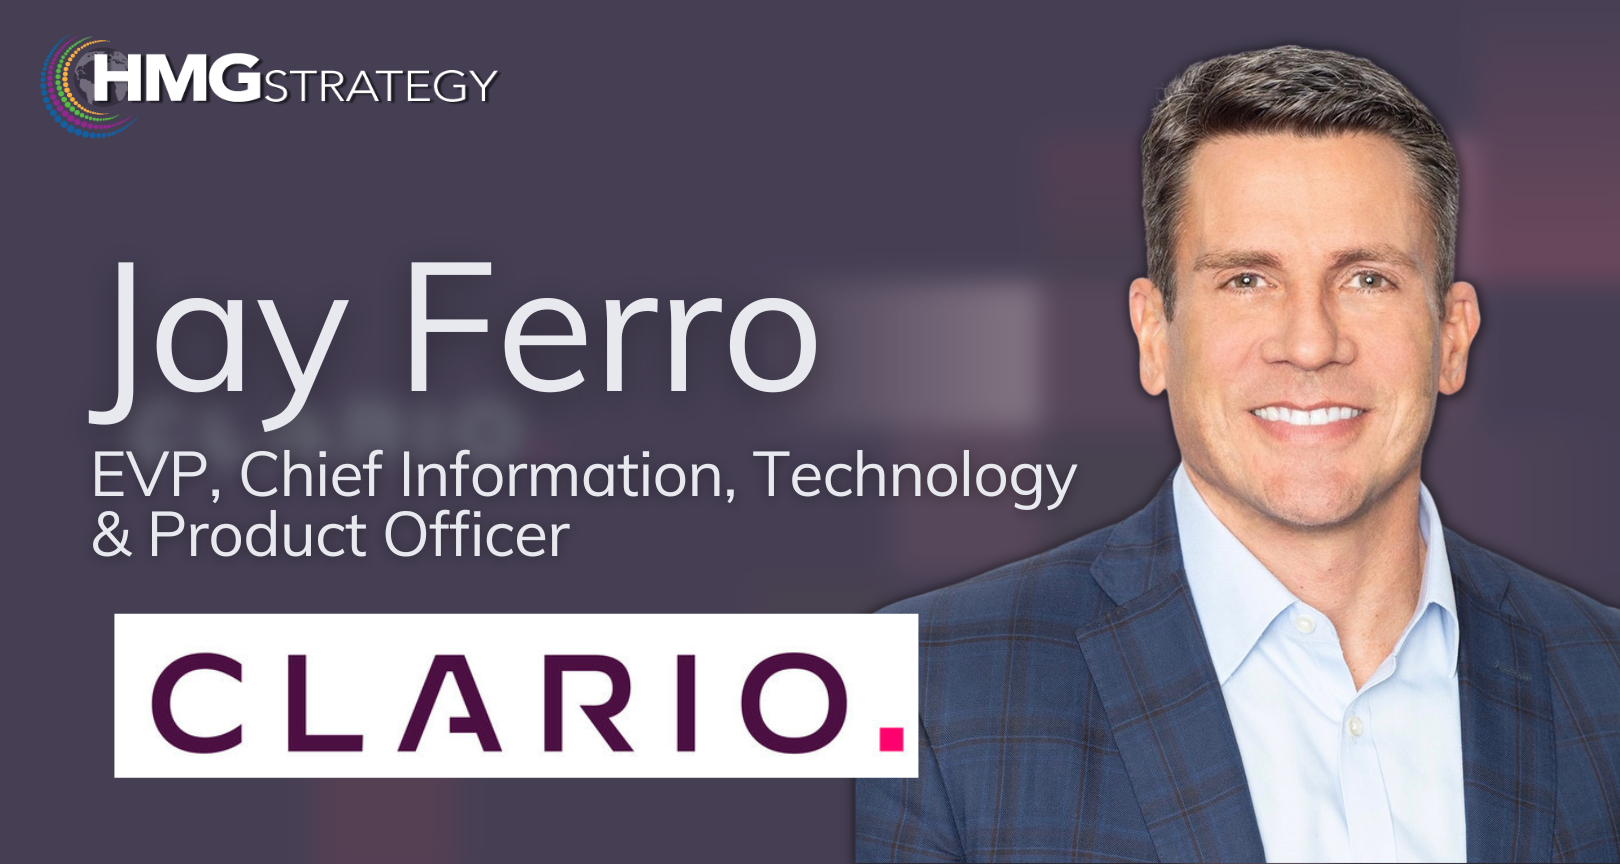 Jay Ferro, EVP, Chief Information, Technology & Product Officer at Clario: Adding Value to the Business Through the CIO+ Role, EVP, Chief Information, Technology & Product Officer, of Clario